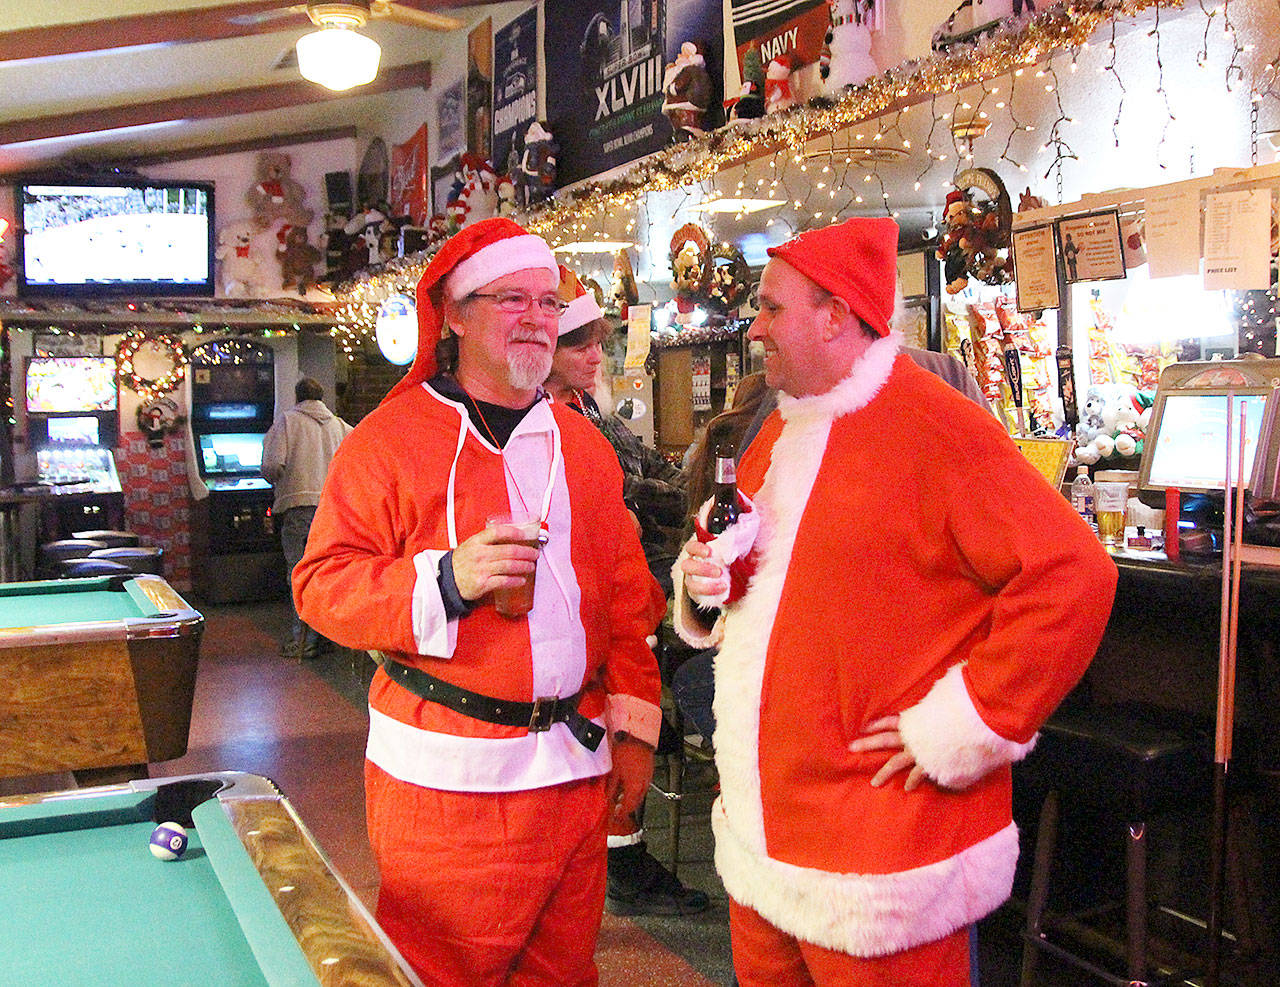 Mike Jackets, left, and Jason Lacey take part in a crucial aspect of the Santa pub crawl tradition. Photo by Laura Guido/Whidbey News-Times